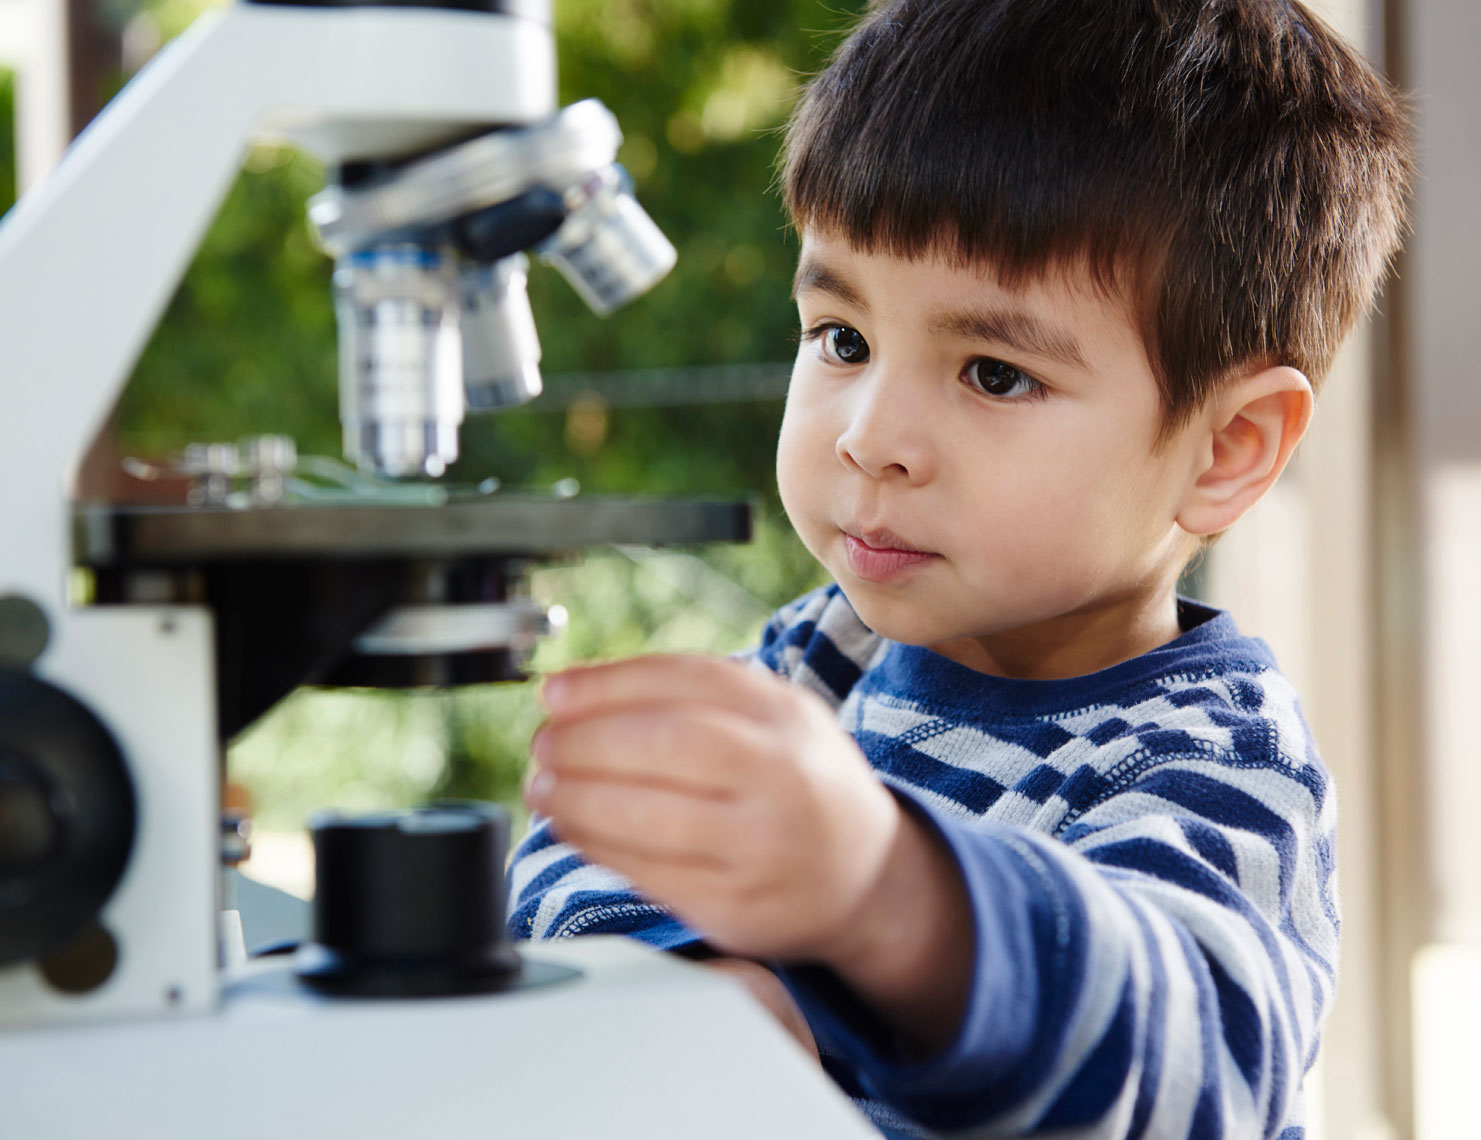 Young-boy-adjusting-microscope-by-annual-report-photographer-Joe-Atlas..